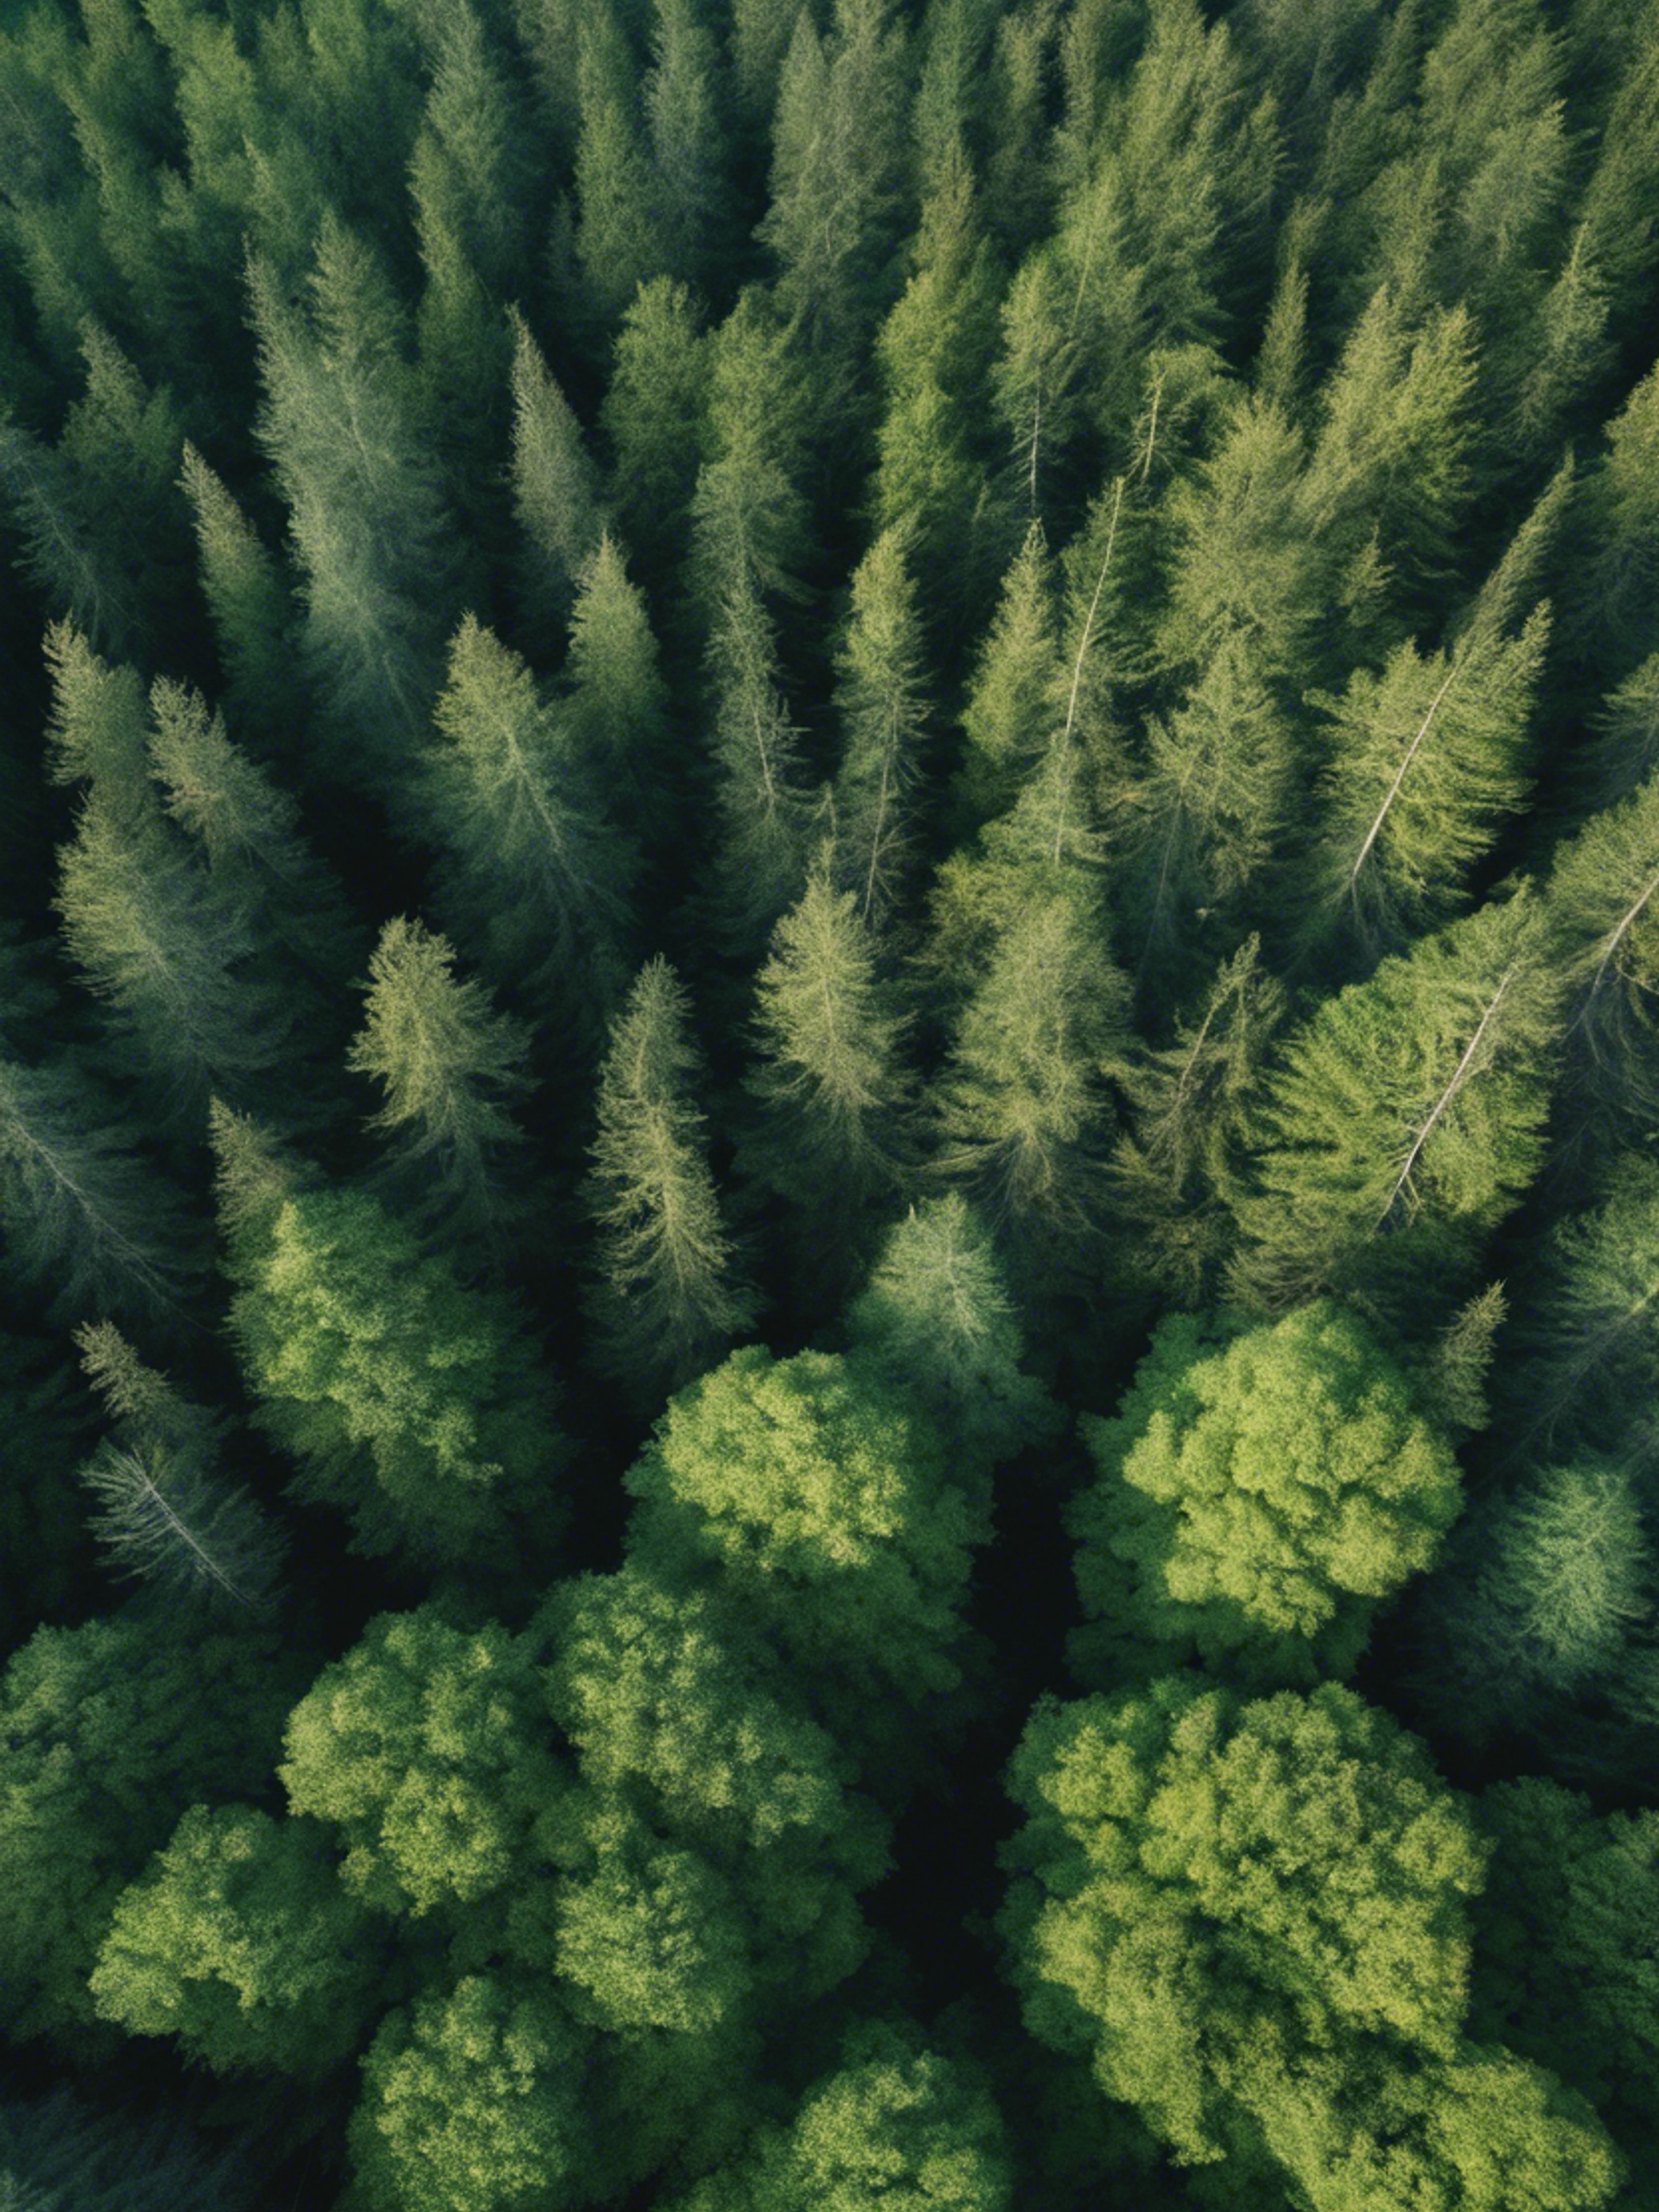 An aerial view of a summer forest, showing different shades of cool green. Валлпапер[0f690078d26f4d7895b4]